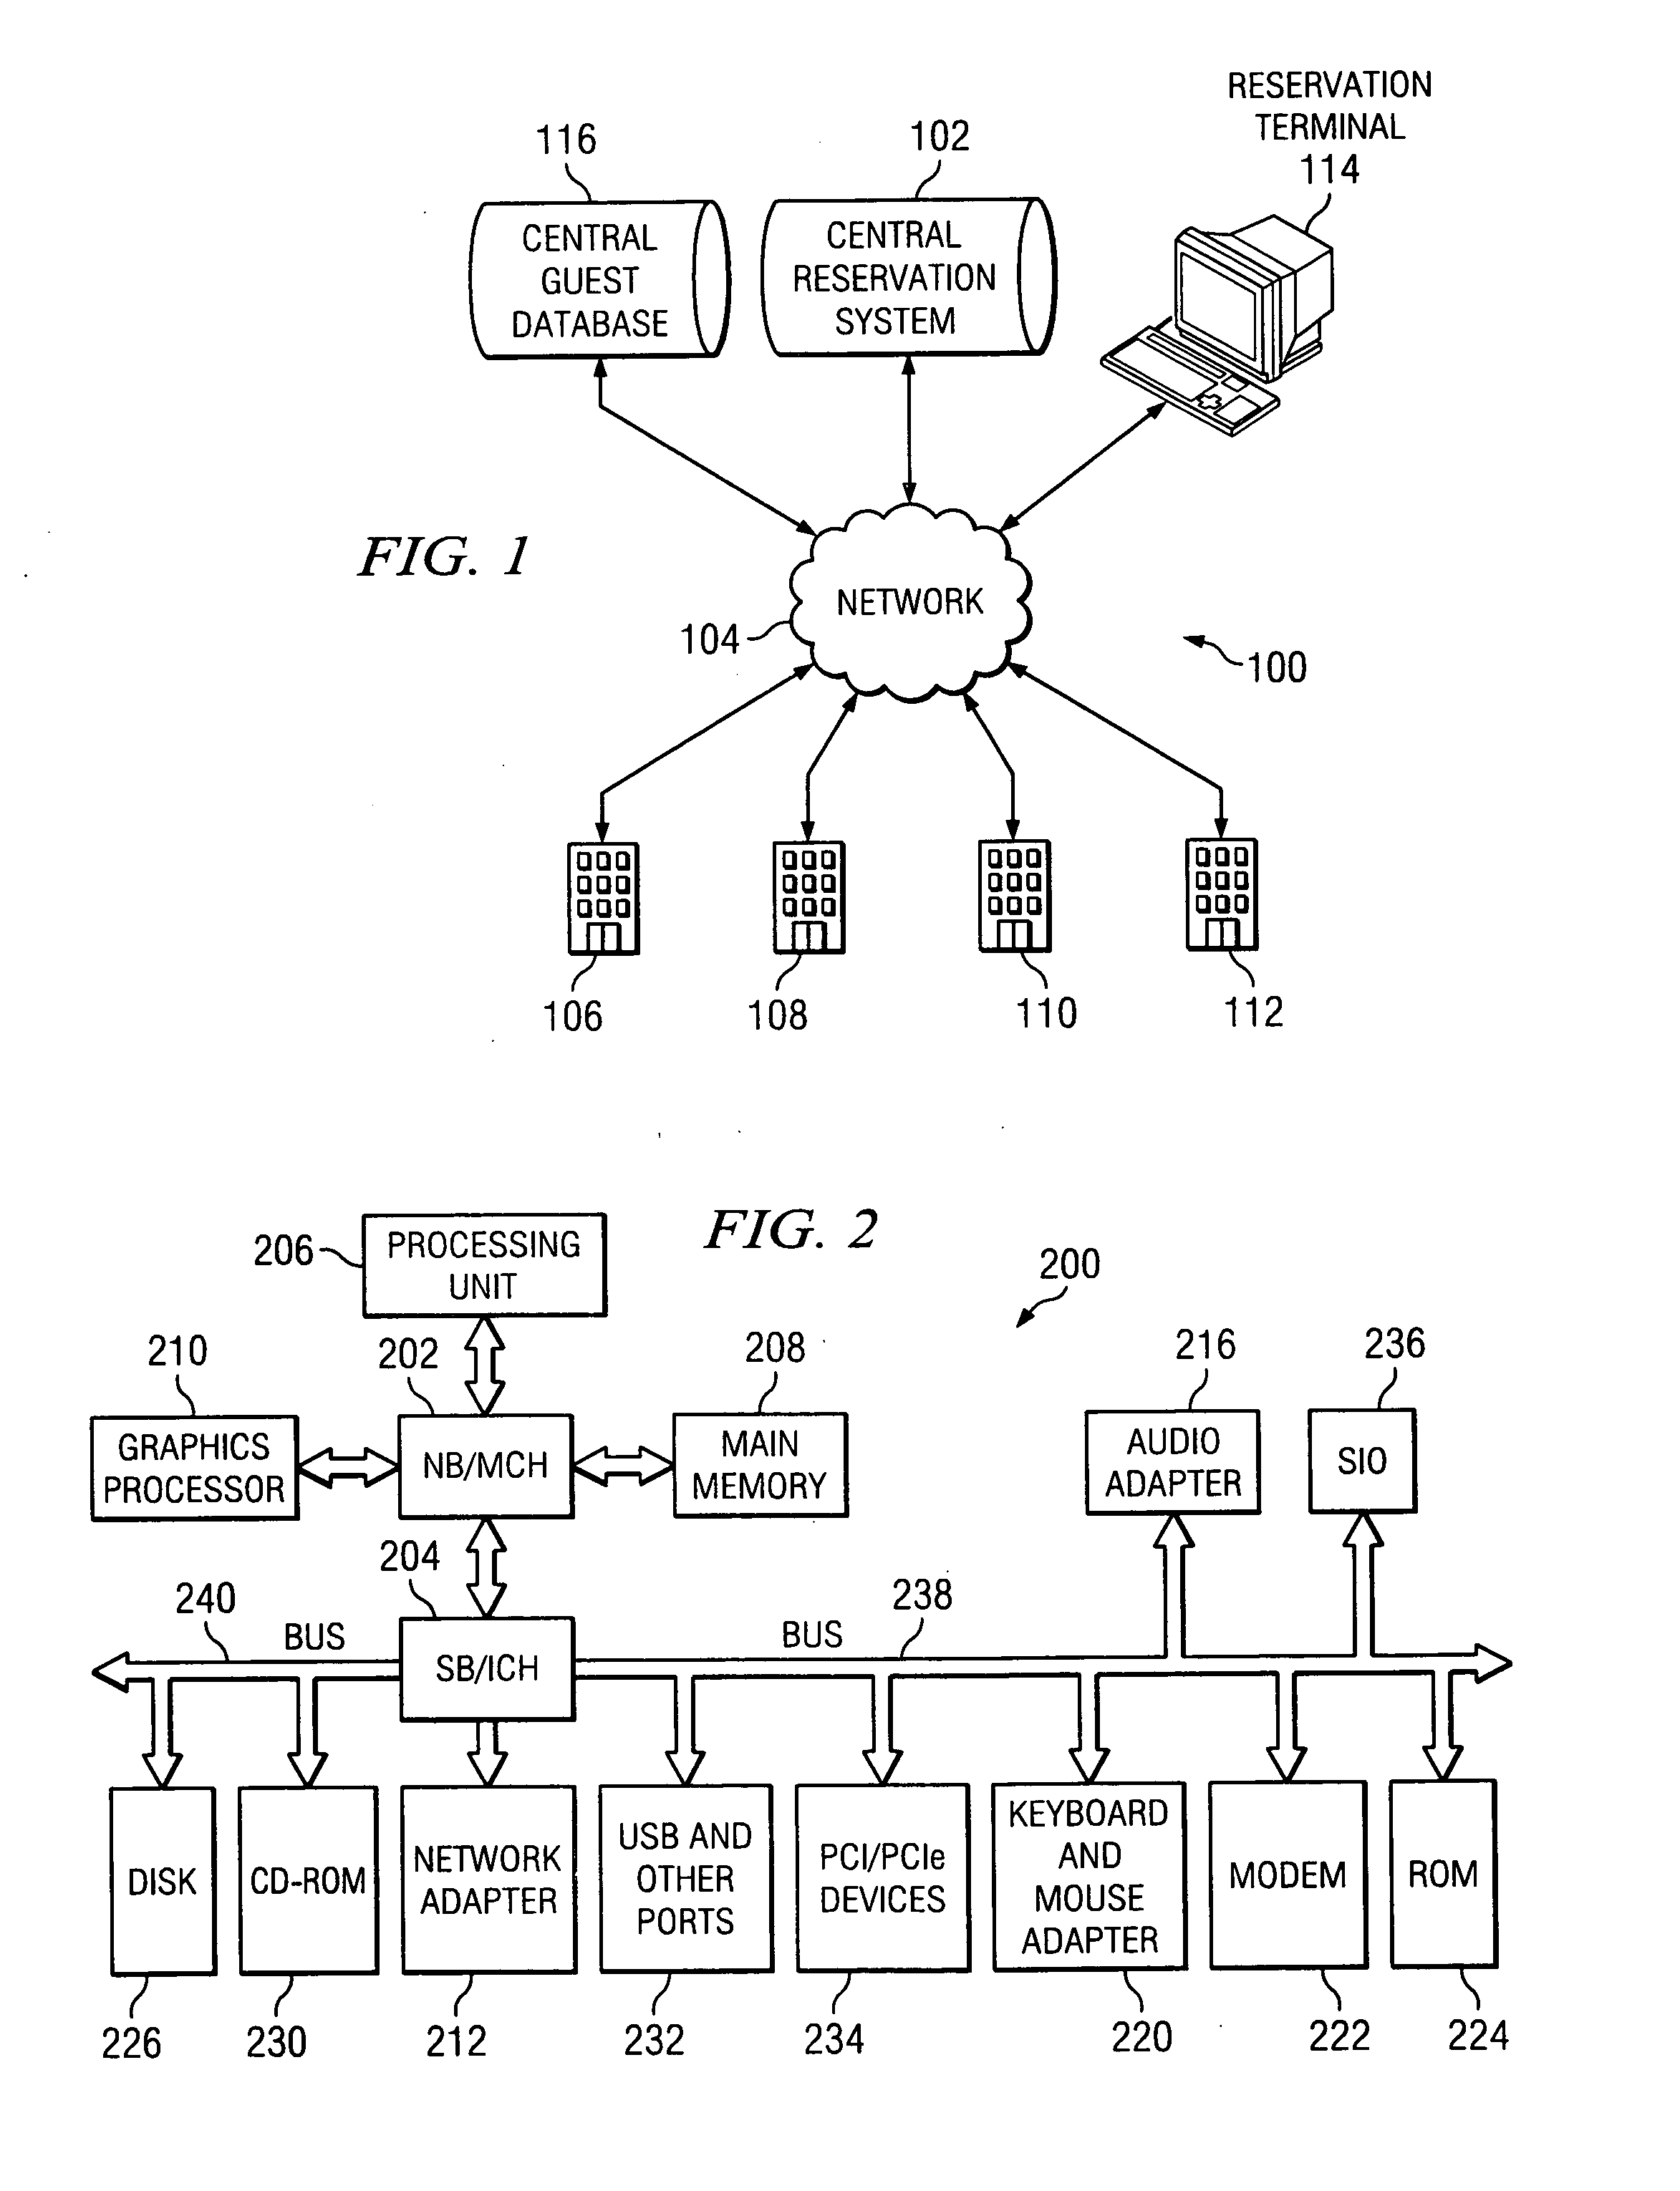 Computer implemented method, apparatus, and computer usable program code for configuring language dependent features